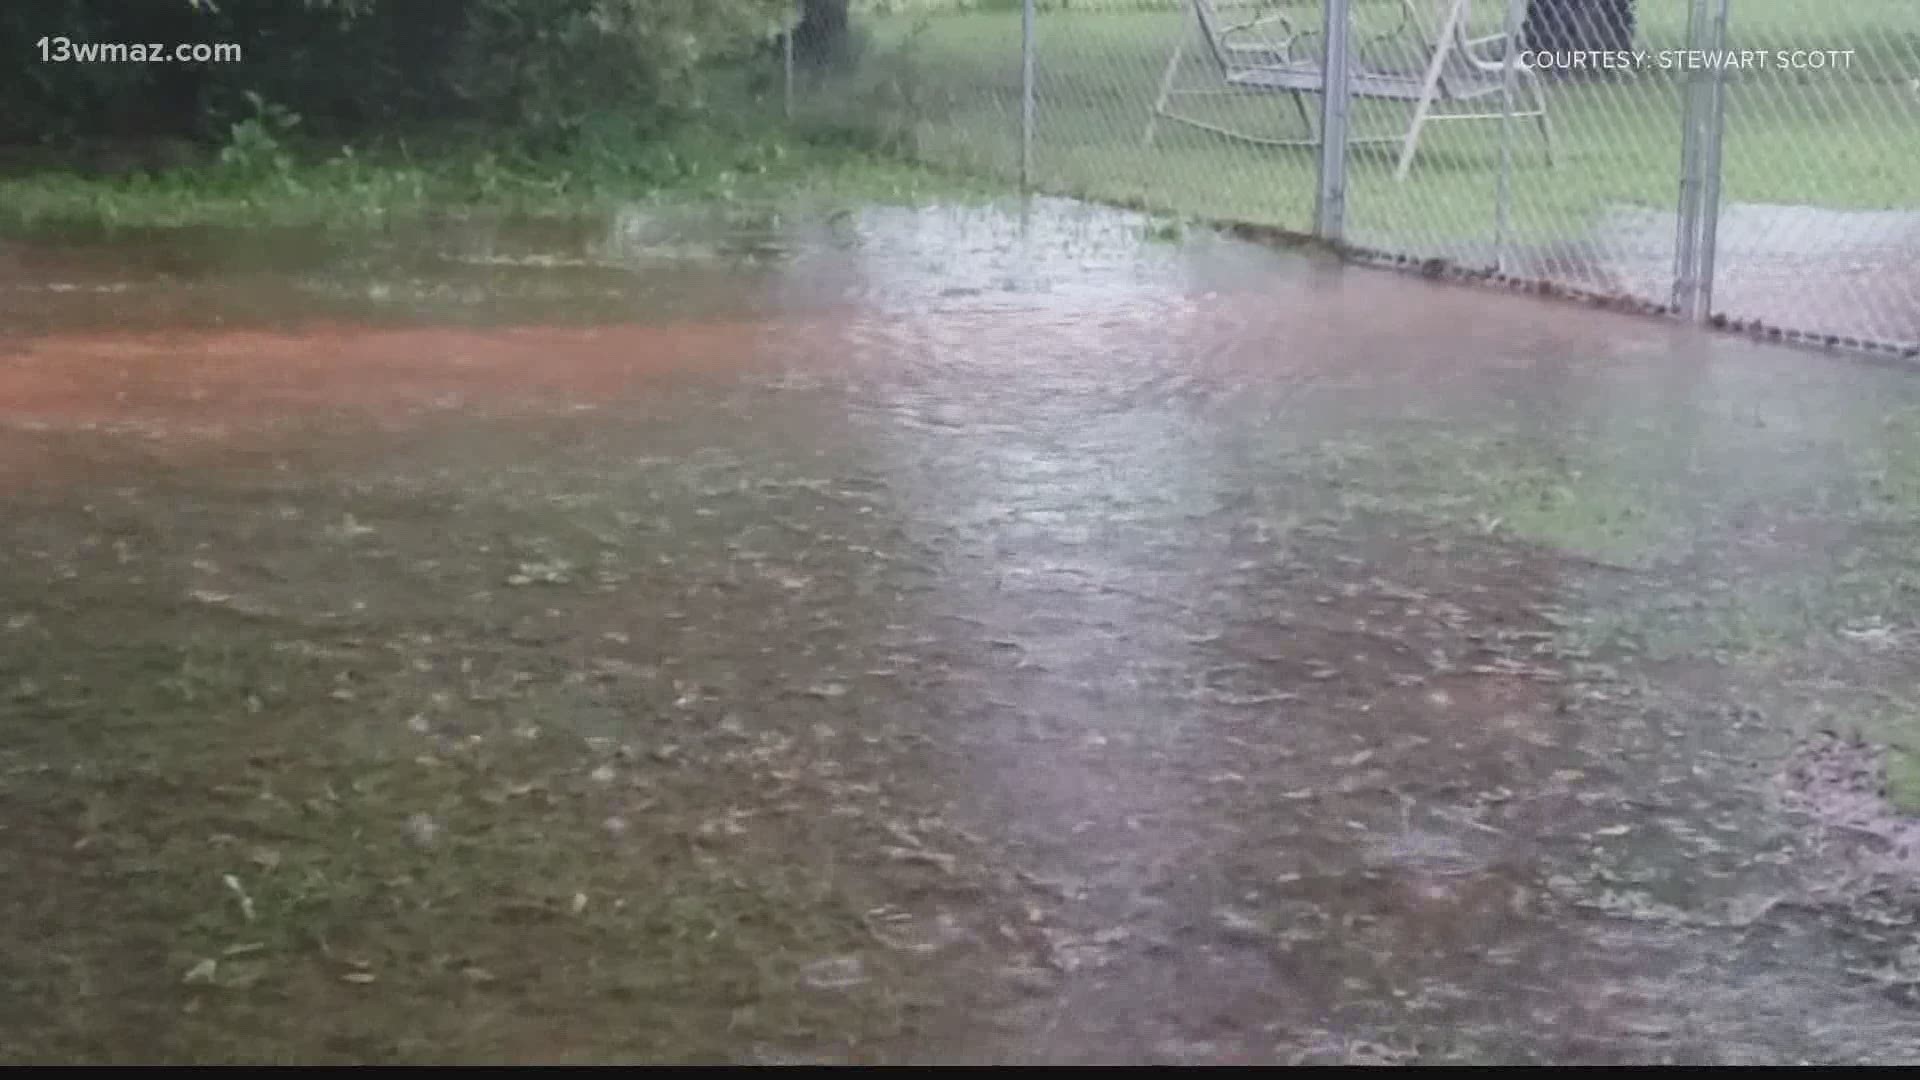 Many people across Houston County and Central Georgia woke up Thursday to see standing water in their yards and on the roads.